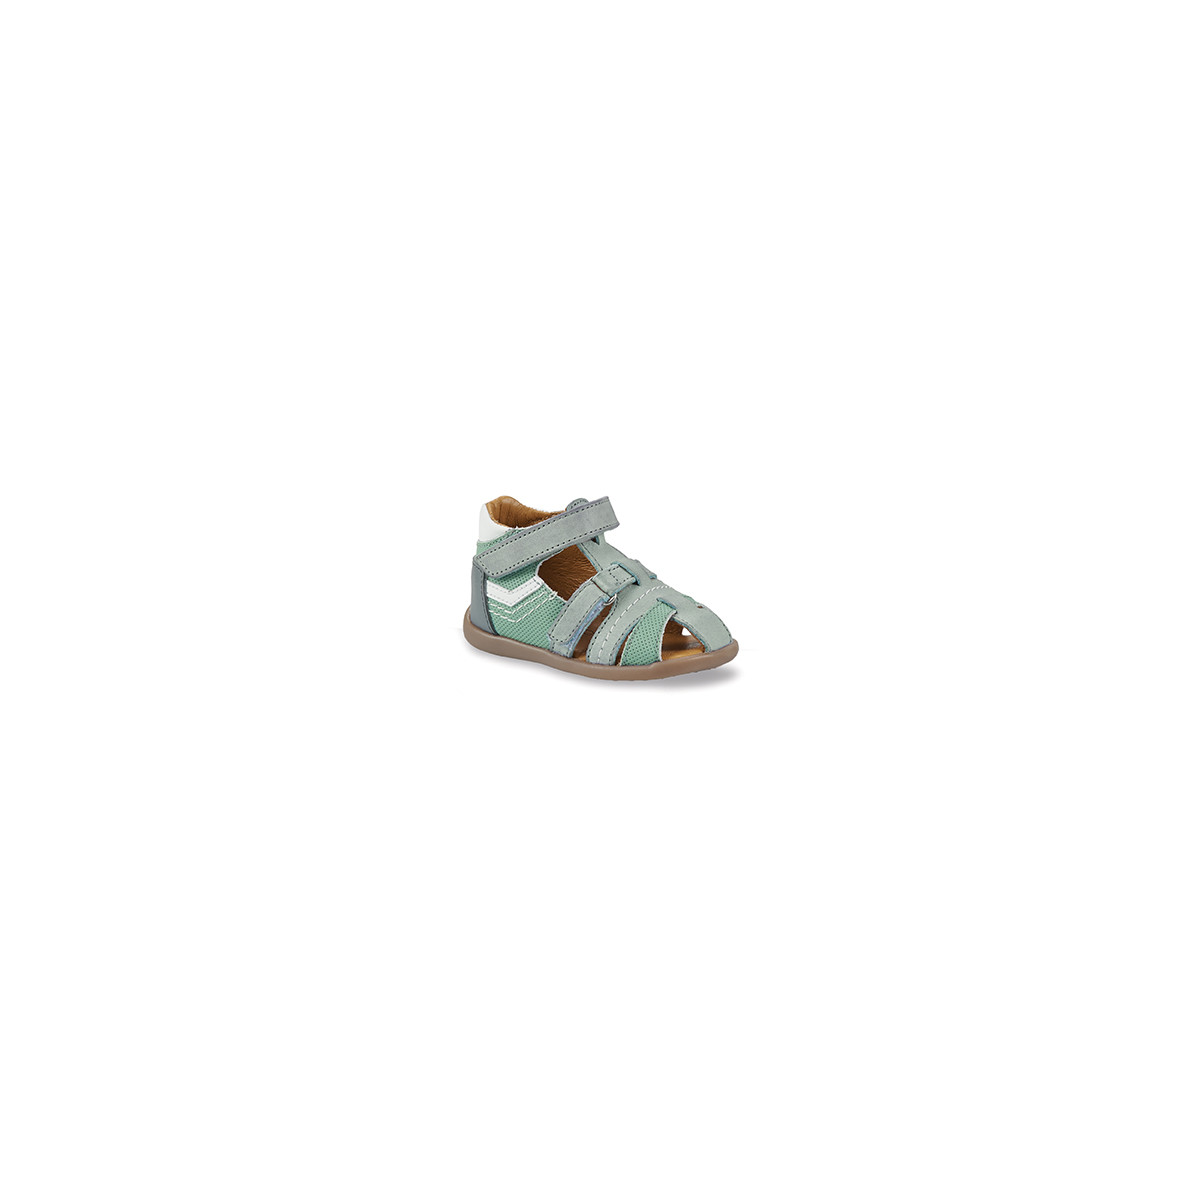 Shoes Boy Sandals GBB DOULOU Green